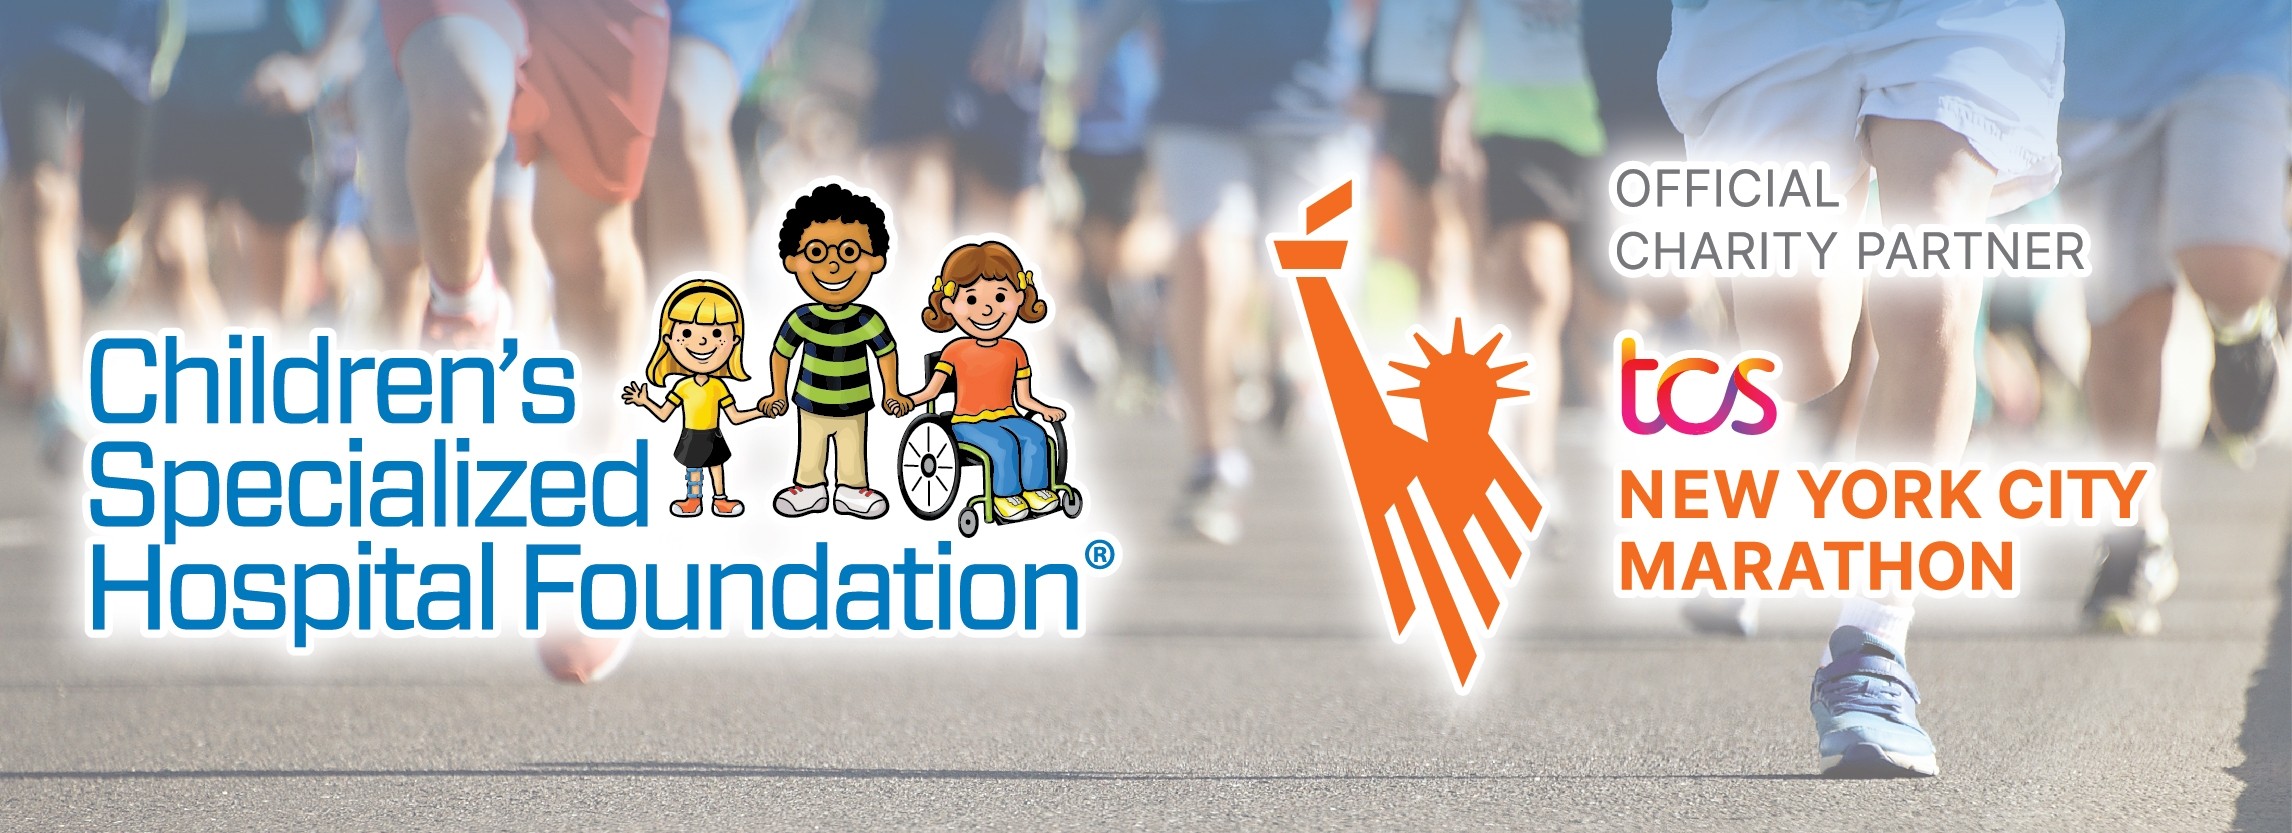 Official Charity Partner of TCS NYC Marathon